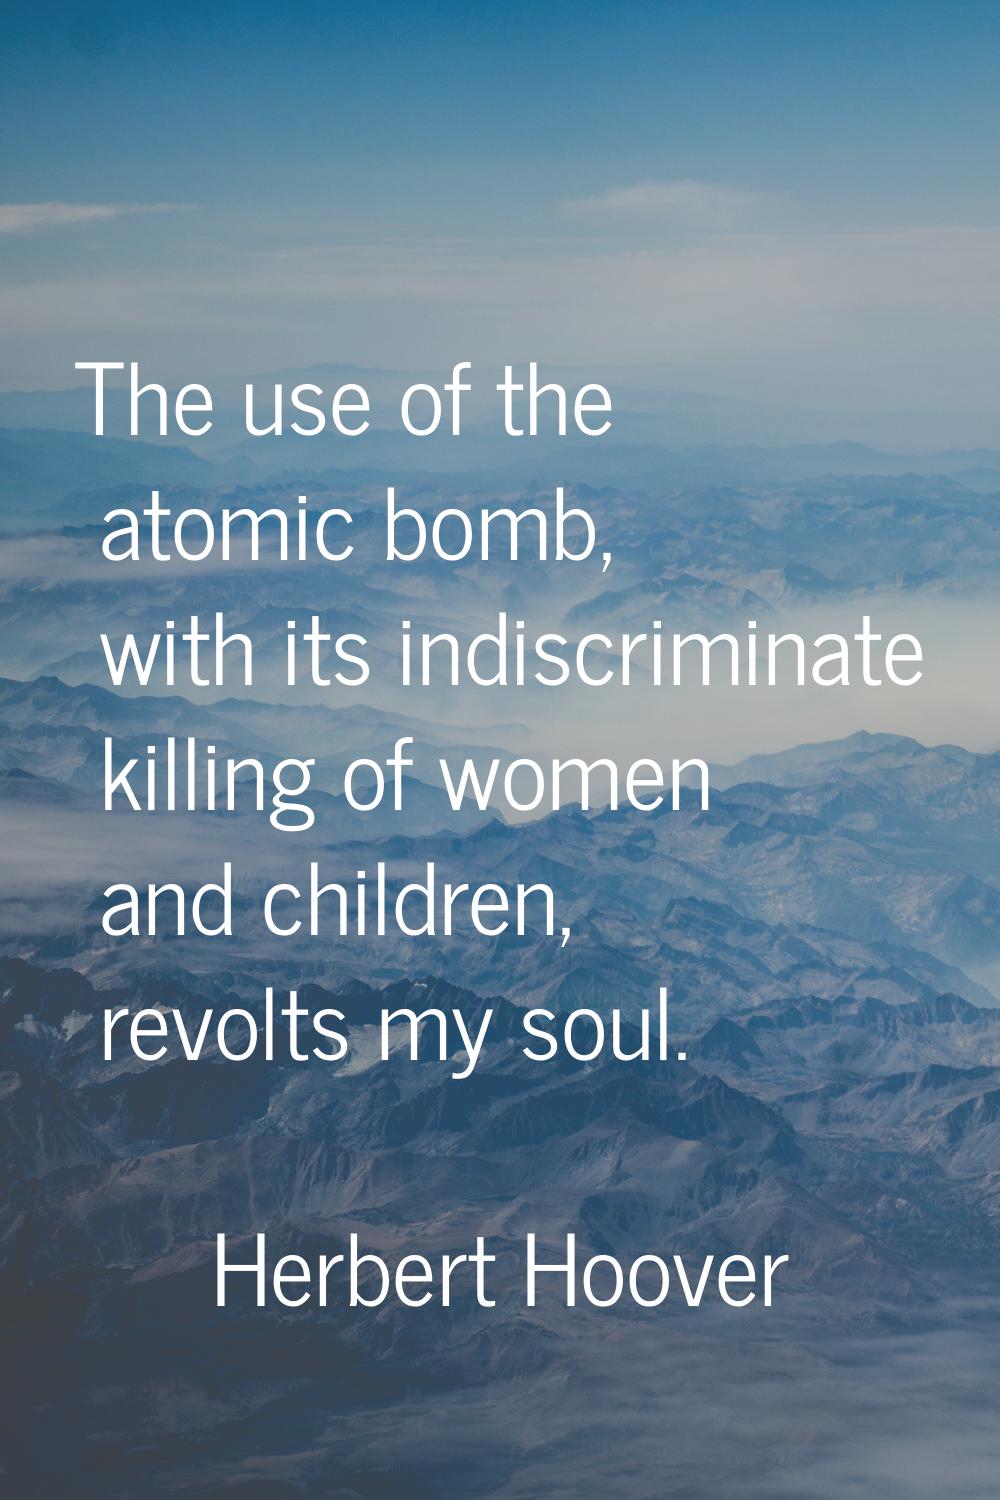 The use of the atomic bomb, with its indiscriminate killing of women and children, revolts my soul.